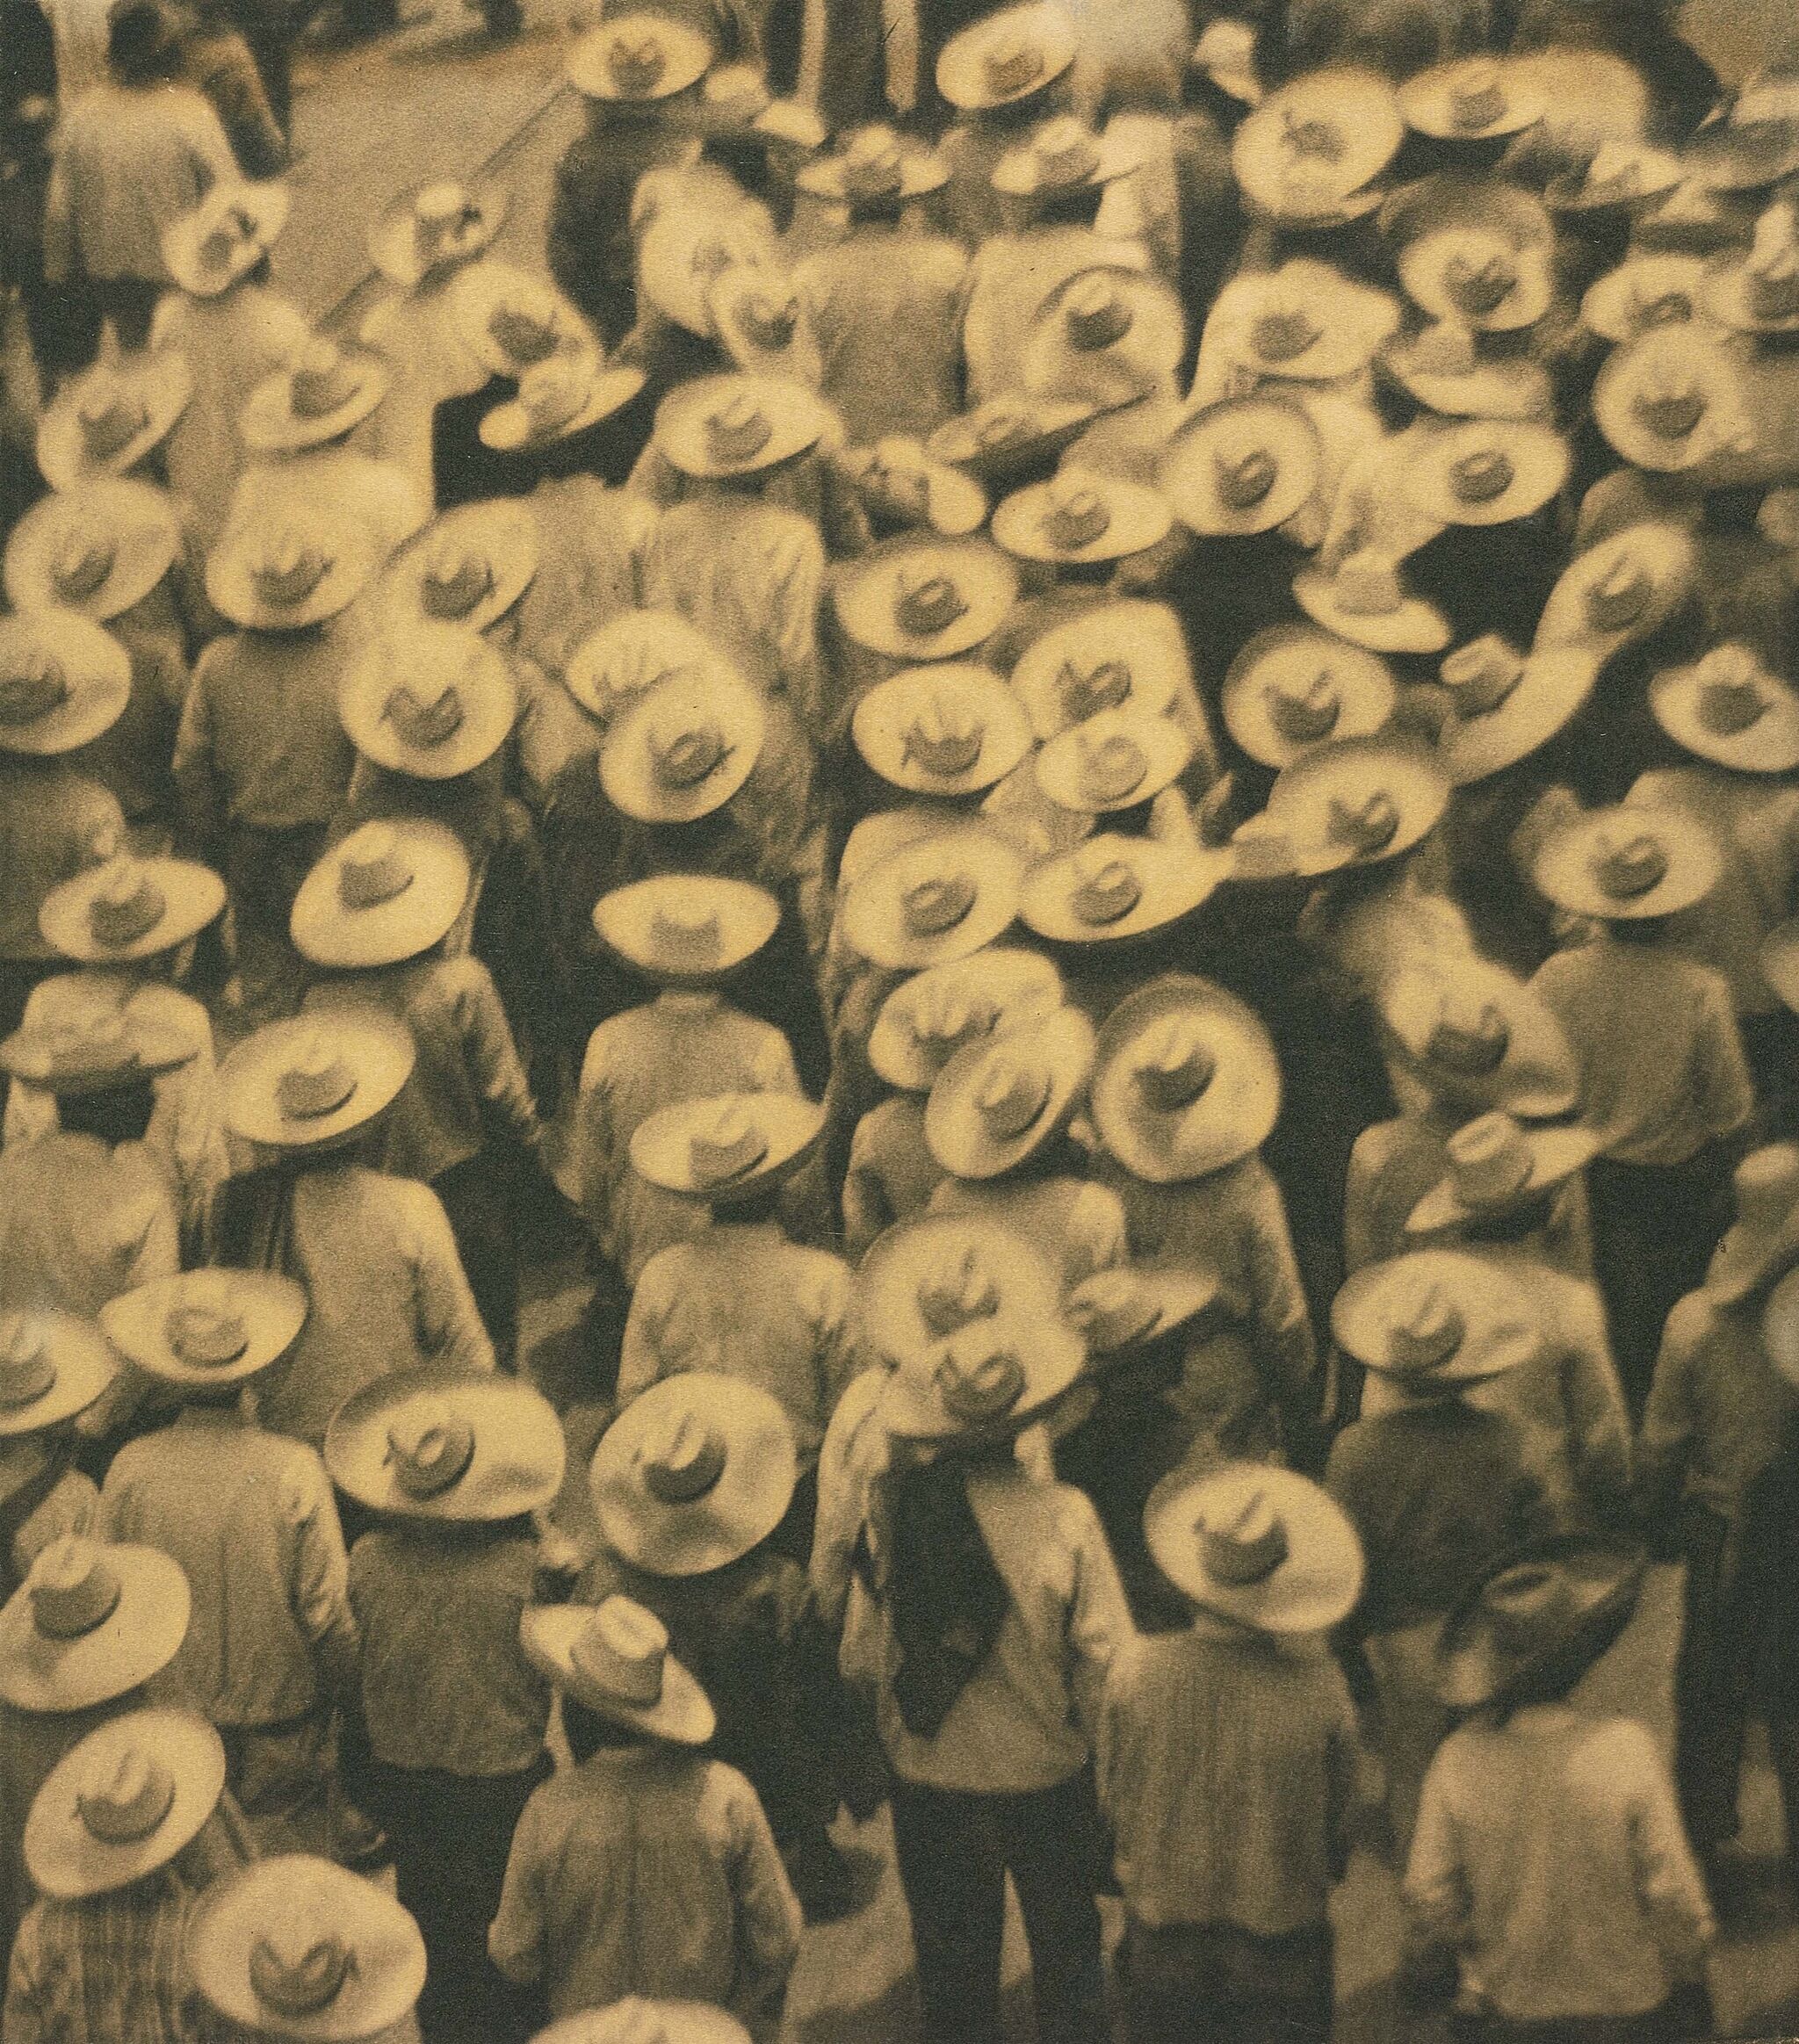 A photo from above of a crowd of people all wearing hats.